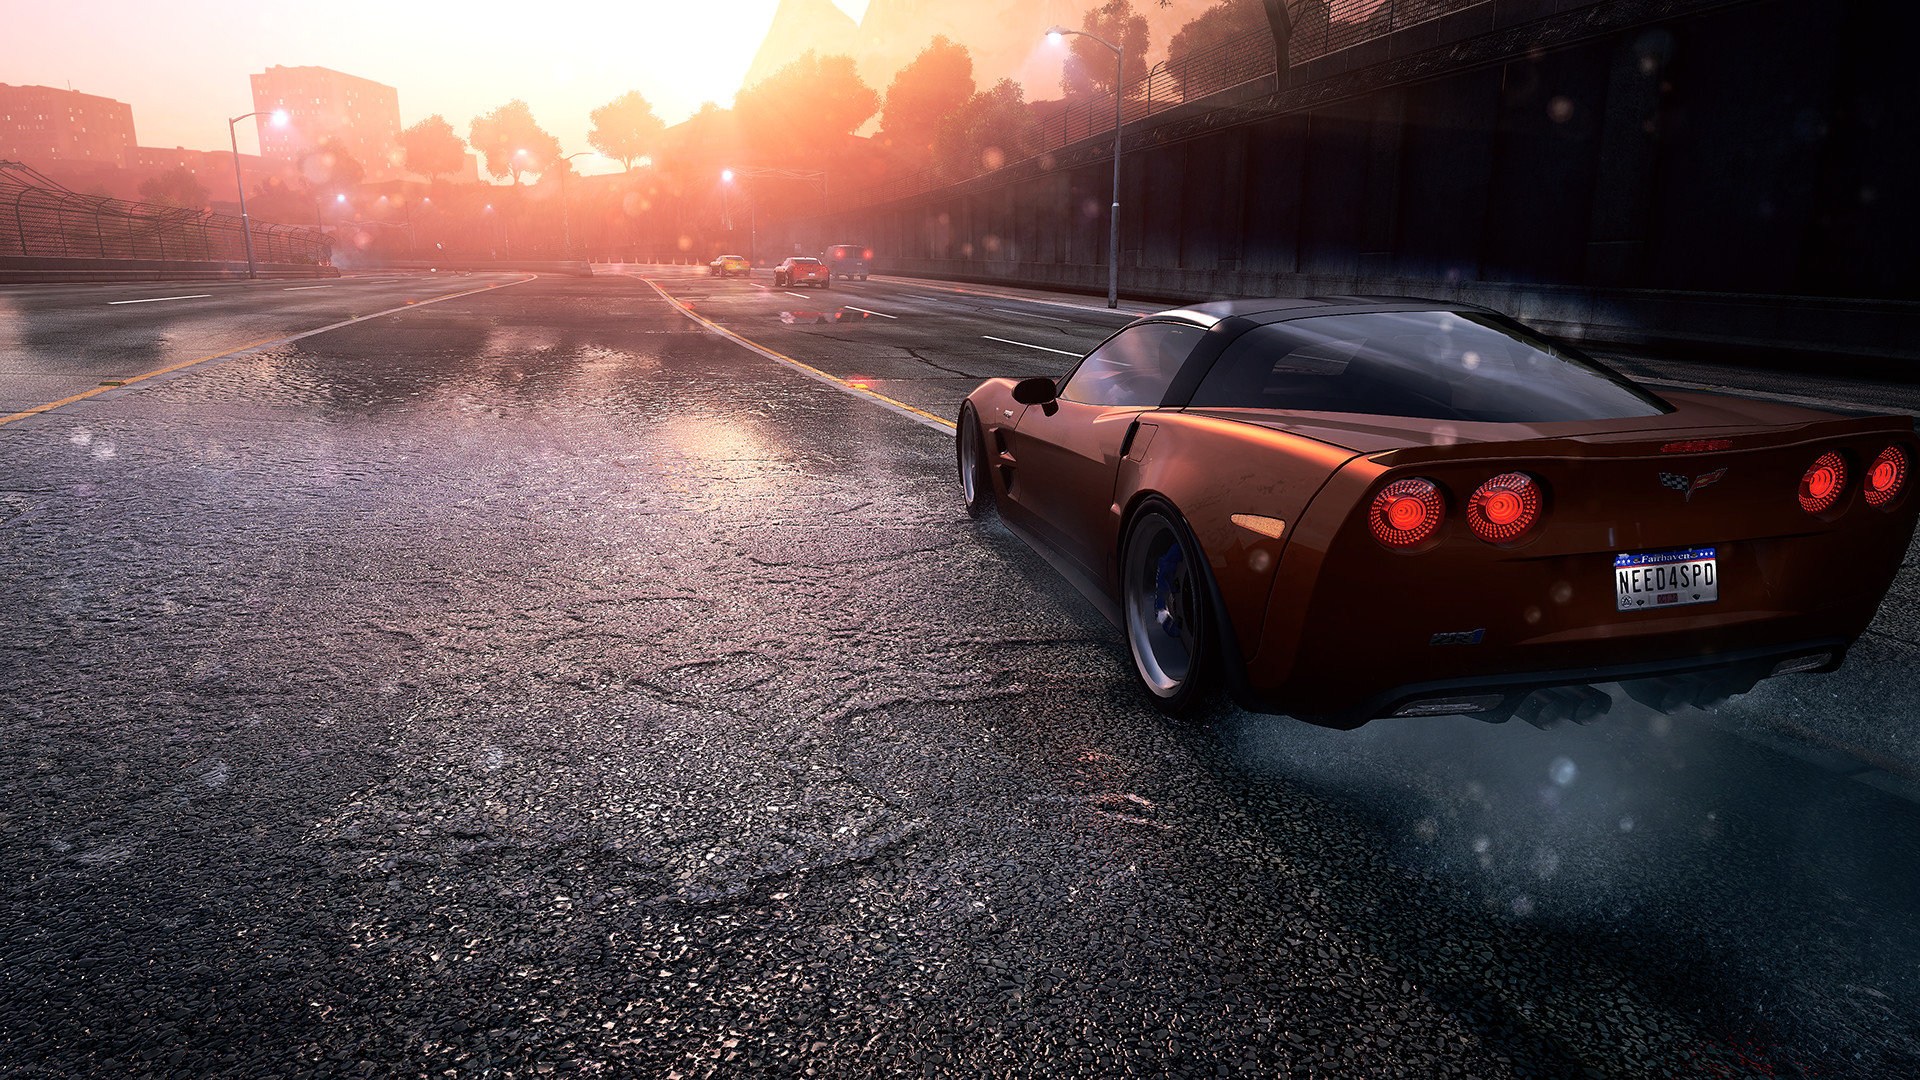 Free Download Need For Speed - Background Need For Speed - HD Wallpaper 